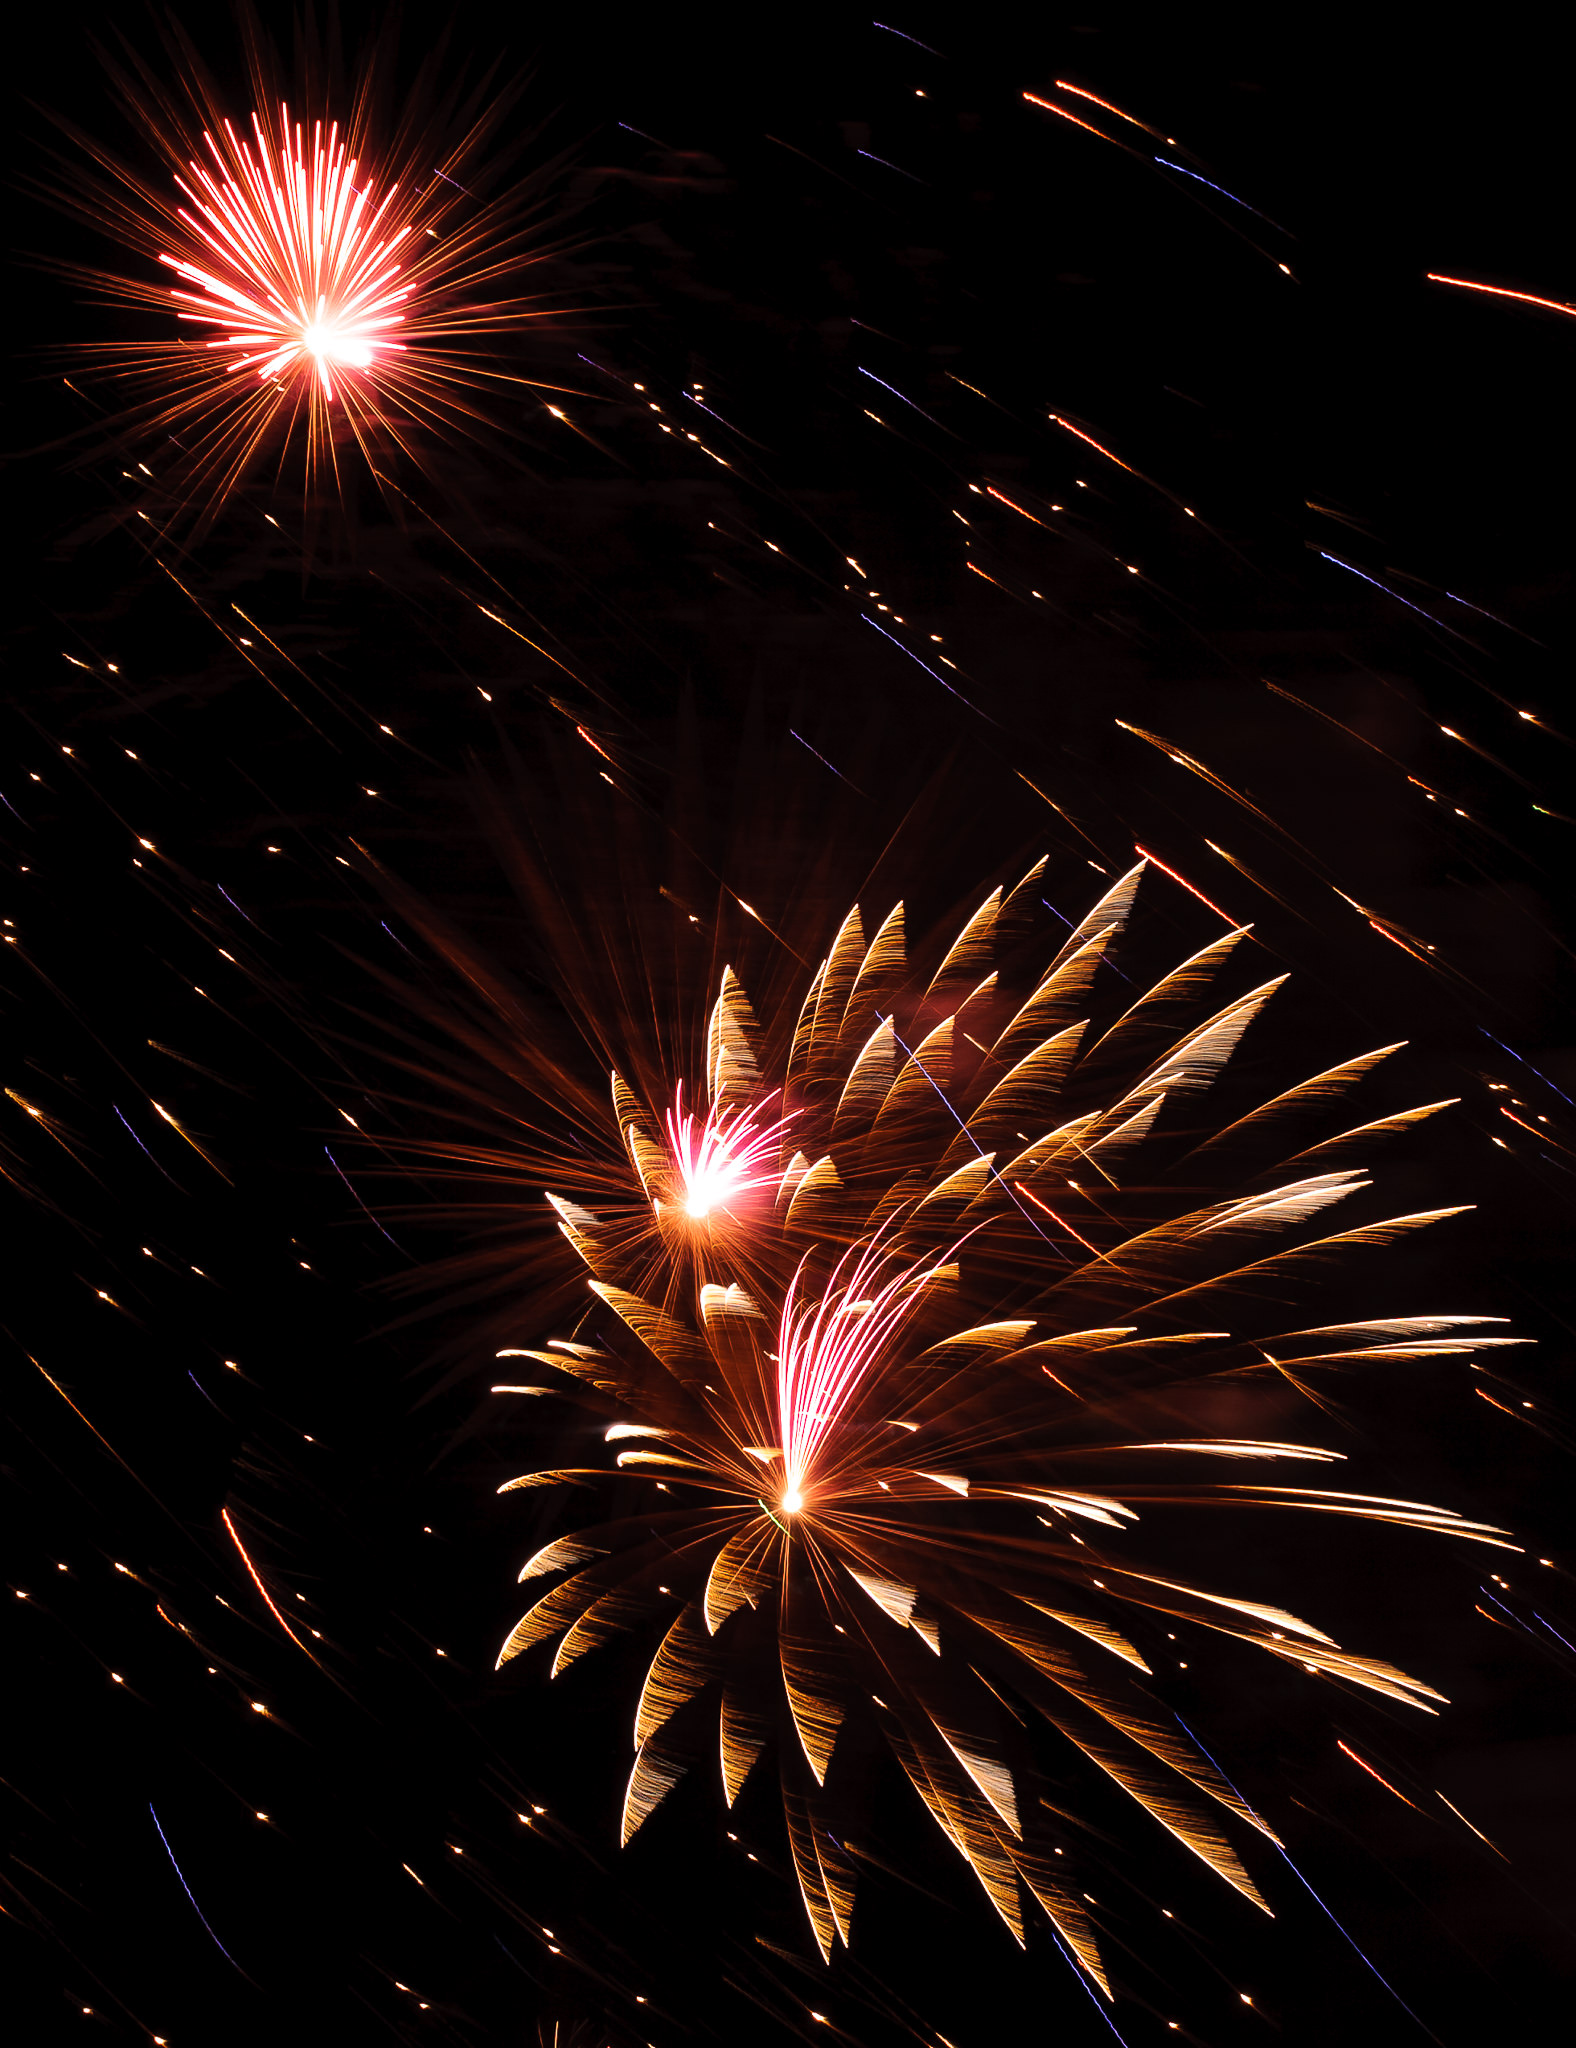 Photography of fireworks display